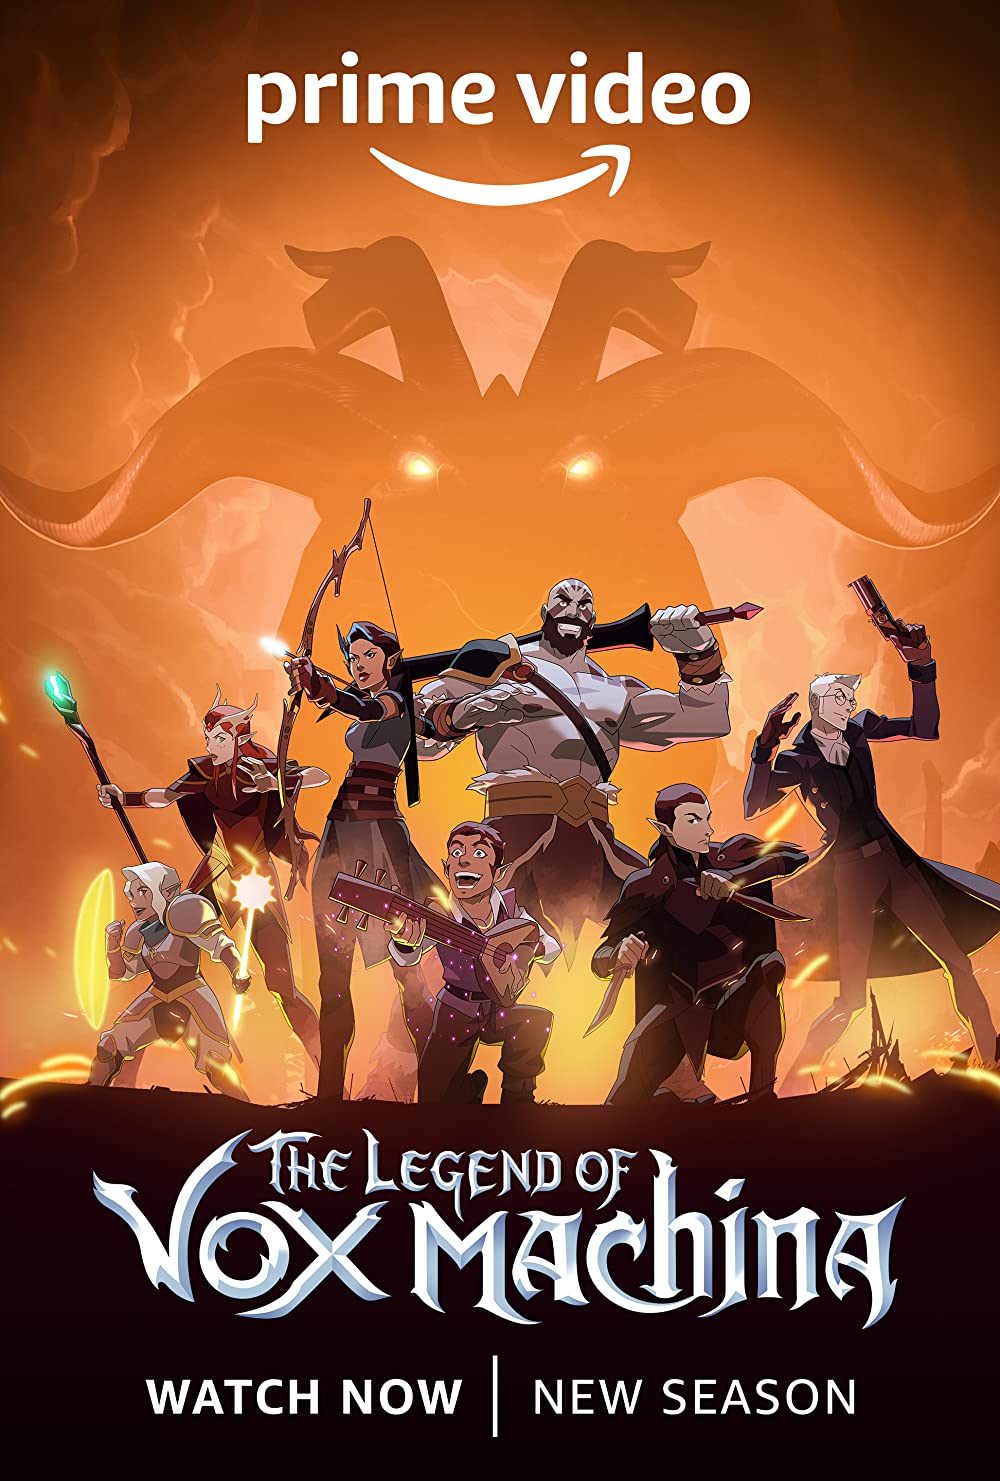 Download The Legend of Vox Machina S01 – Amazon Prime (2023) Dual Audio {Hindi ORG+English] Complete Netflix Web Series 1080p [4.8GB] | 720p [2GB] | 480p [900MB] download